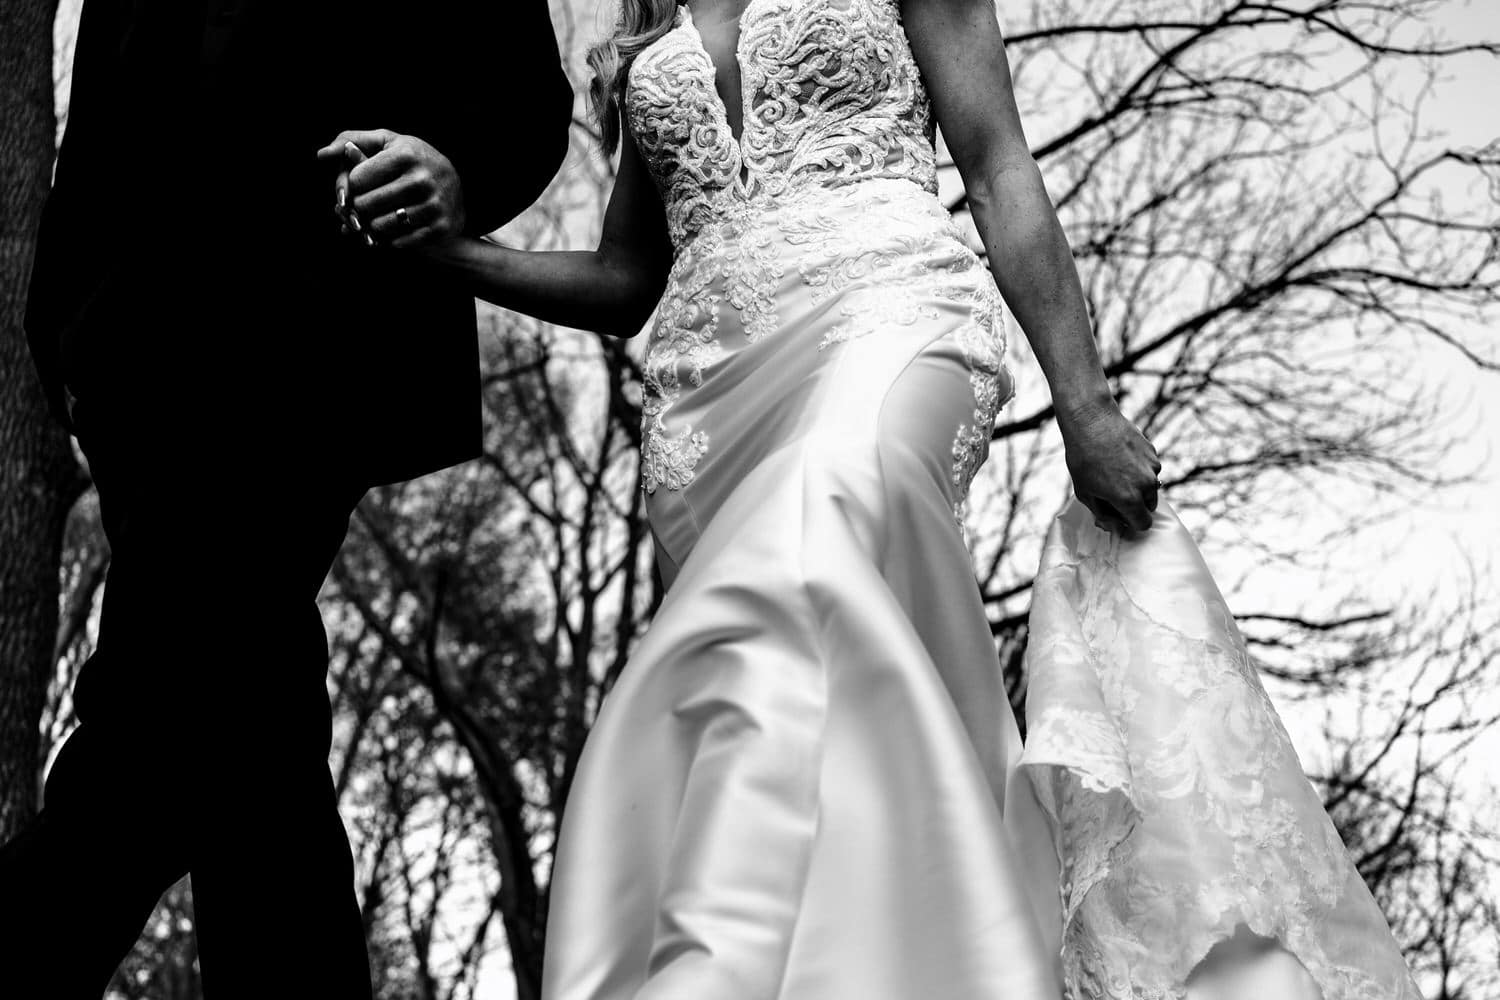 A close-up, black and white picture of a bride and groom holding hands, the bride's other hand holding up the train of her wedding gown. 